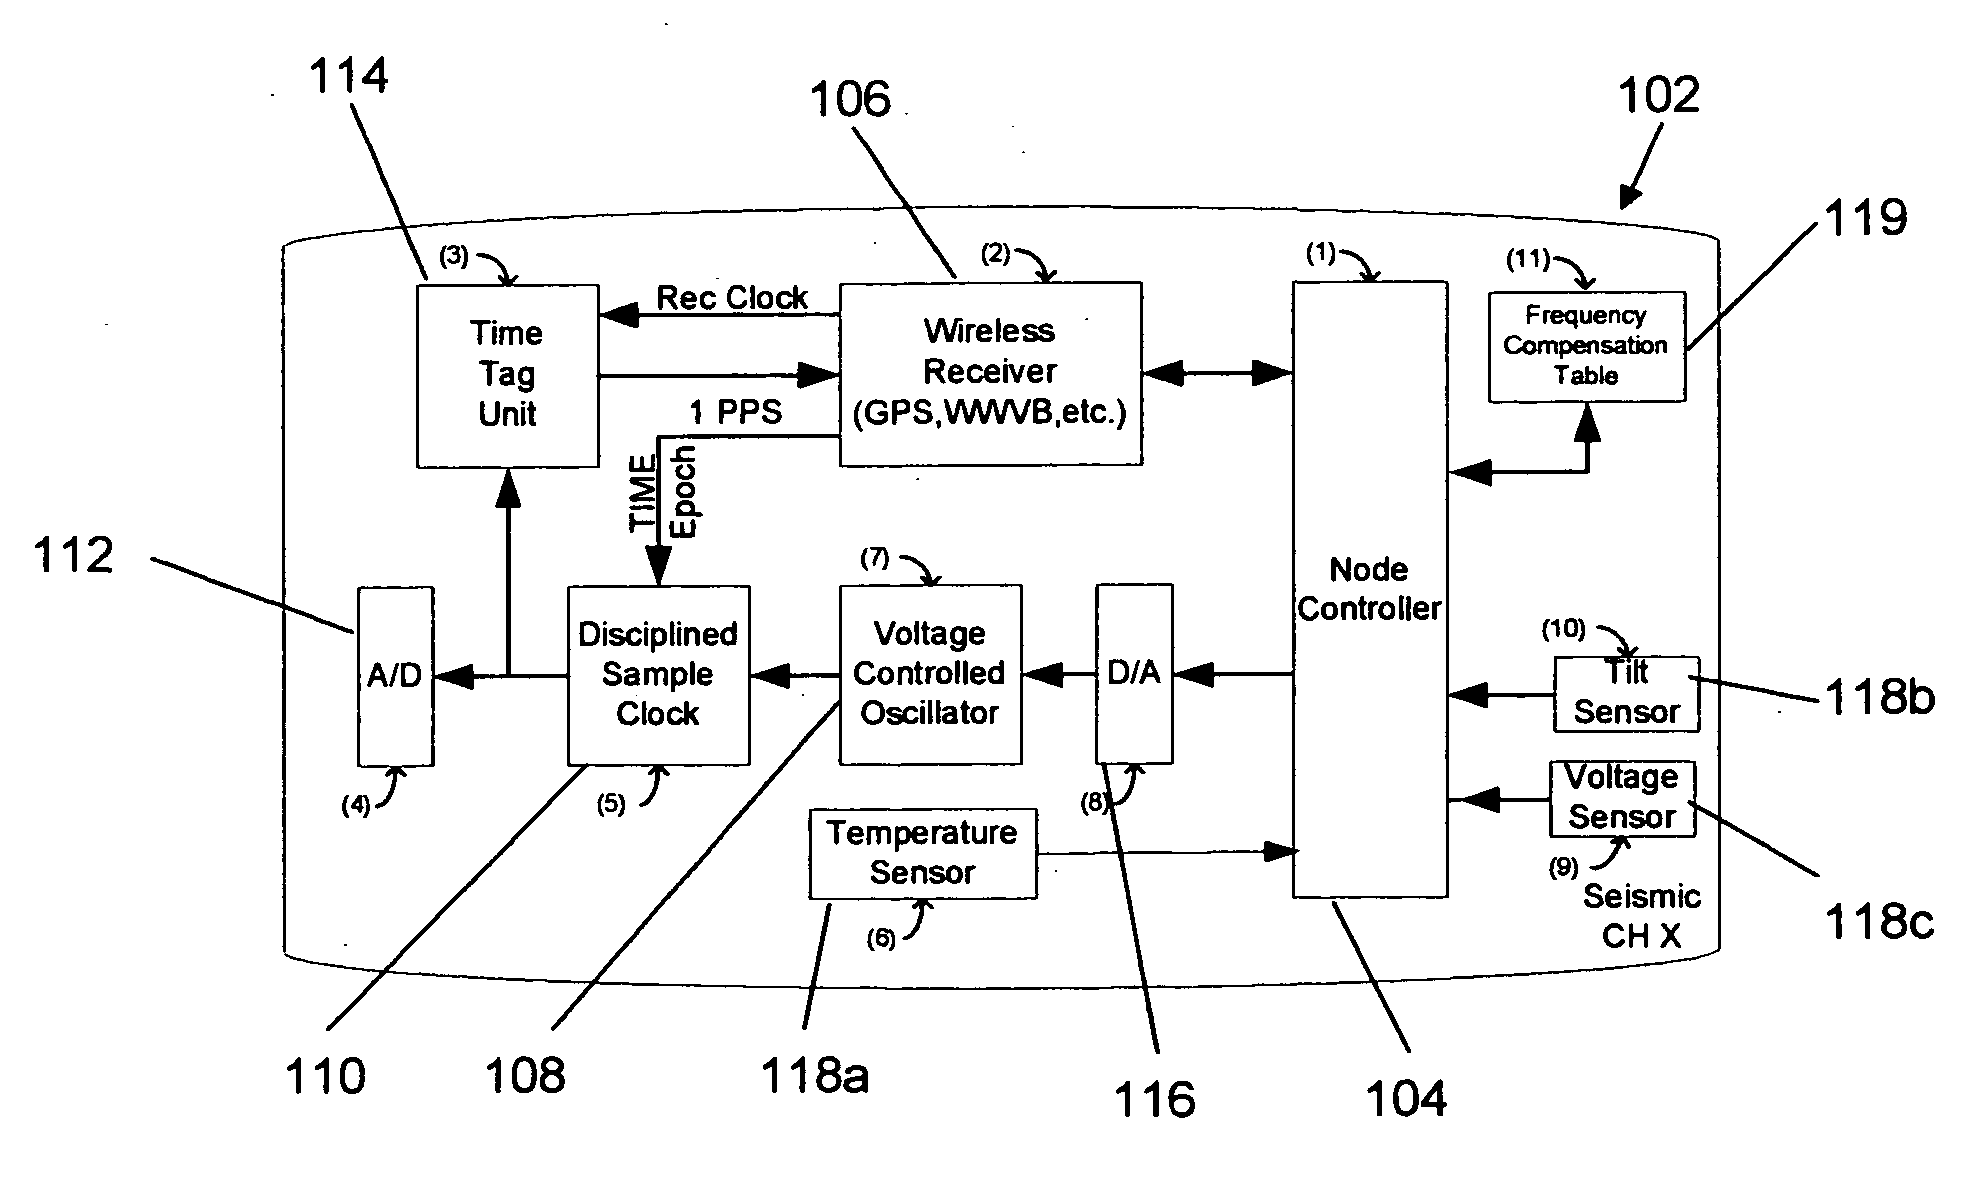 Method and apparatus for correcting the timing function in a nodal seismic data acquisition unit